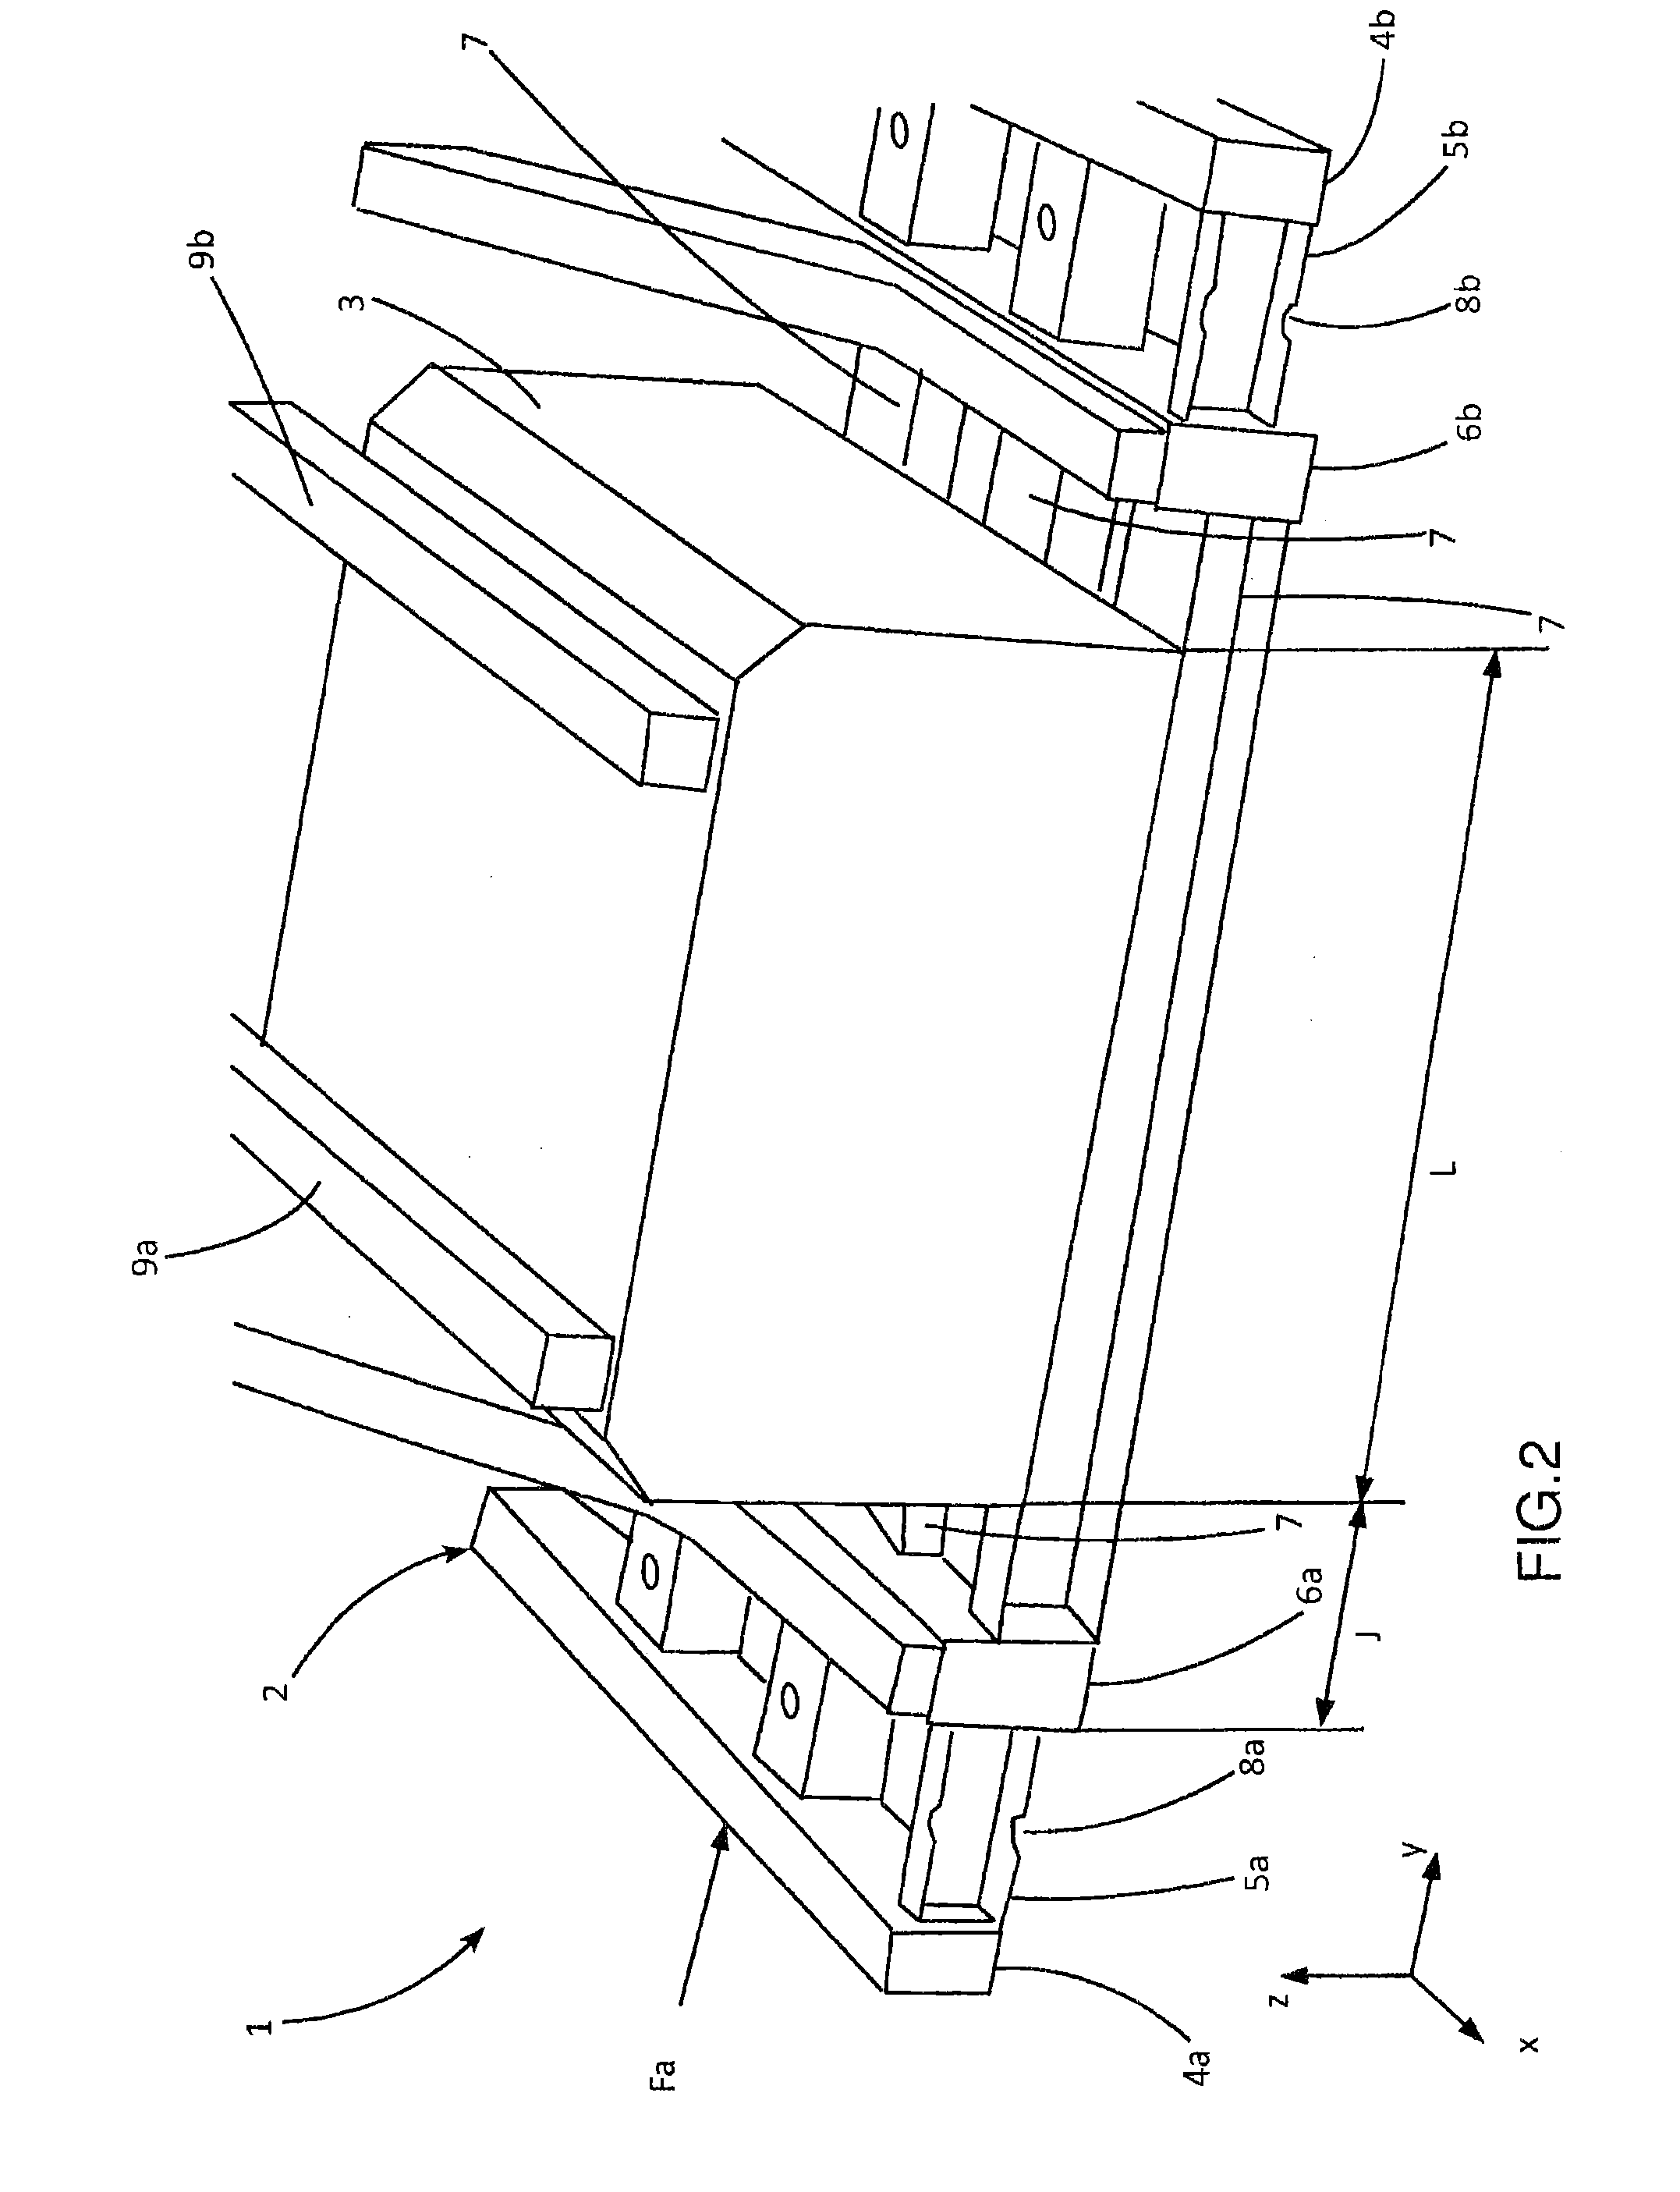 Structure intended to hold an electric battery for powering an electric motor for driving a motor vehicle